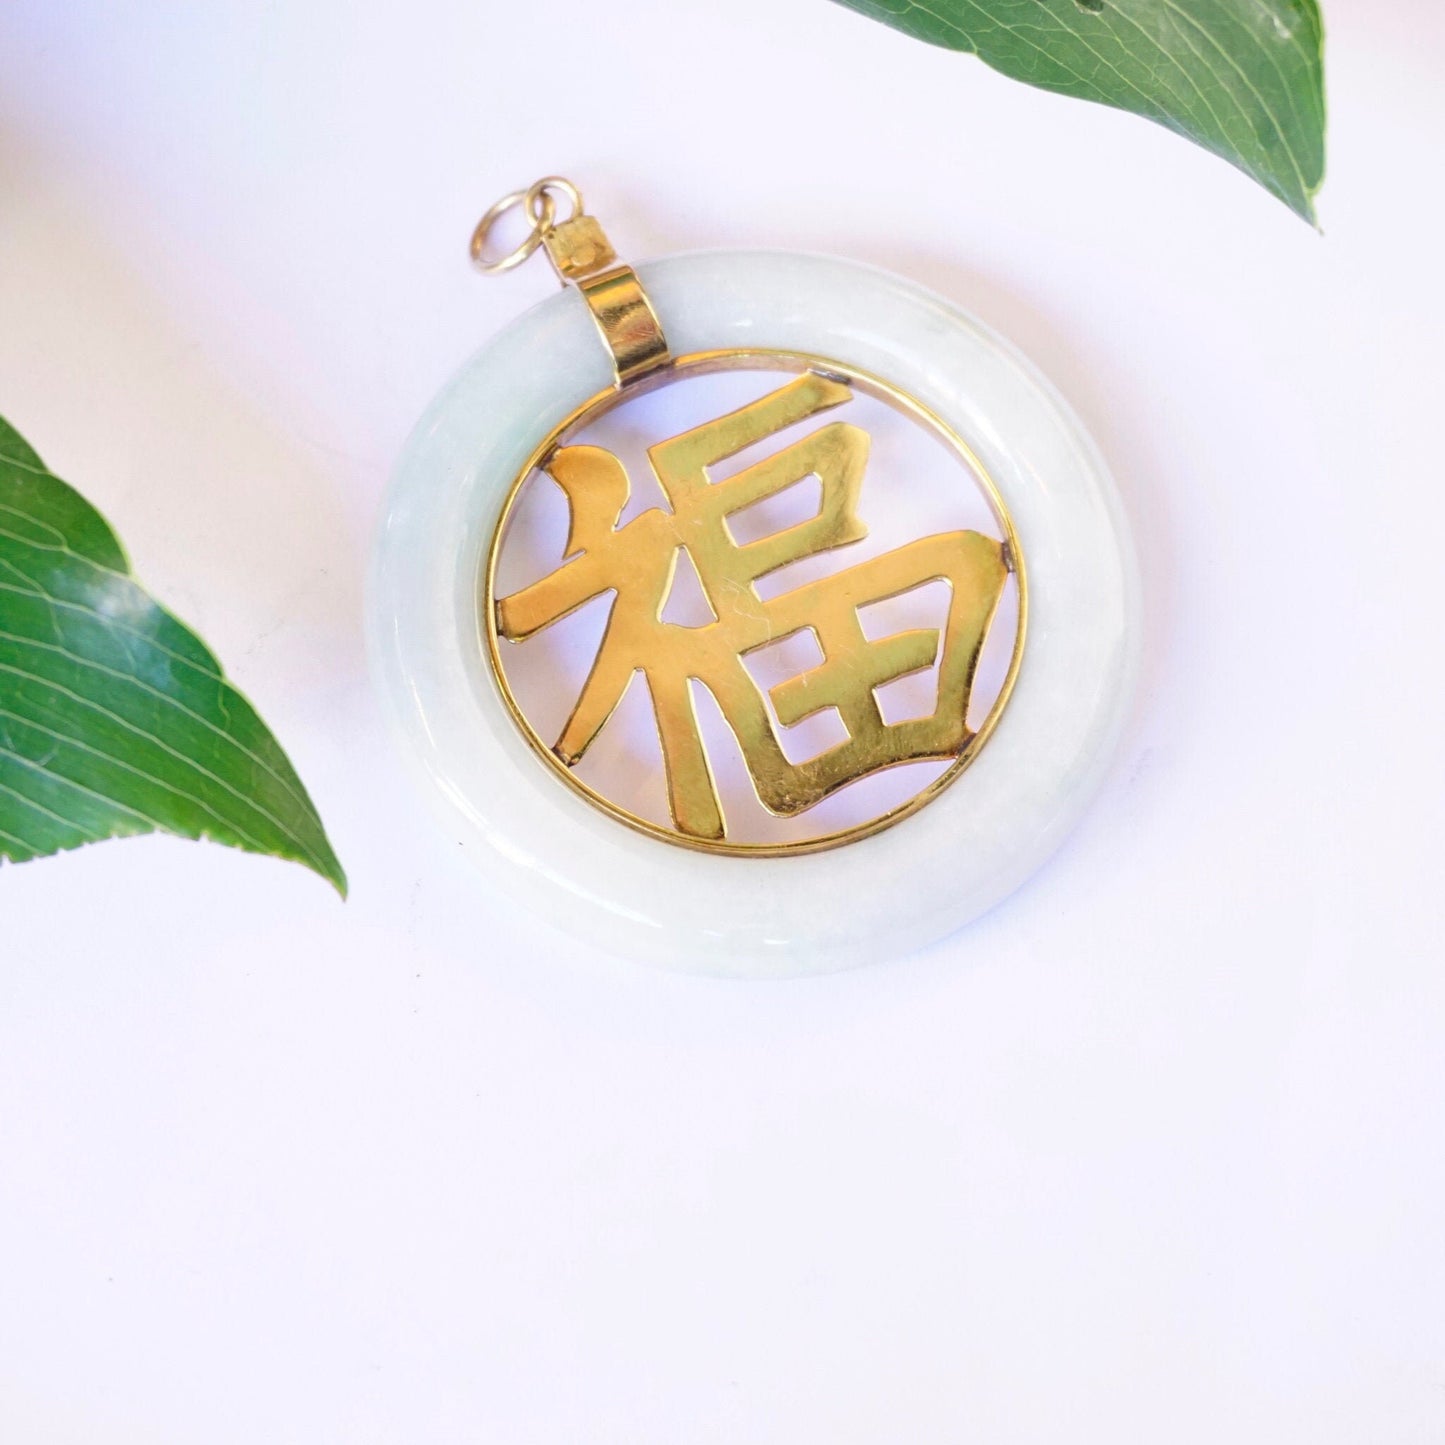 Vintage 14K Gold Chinese Symbol Pendant with Light Green Jade, Large Jade Pendant with Intricate Gold Chinese Character Design